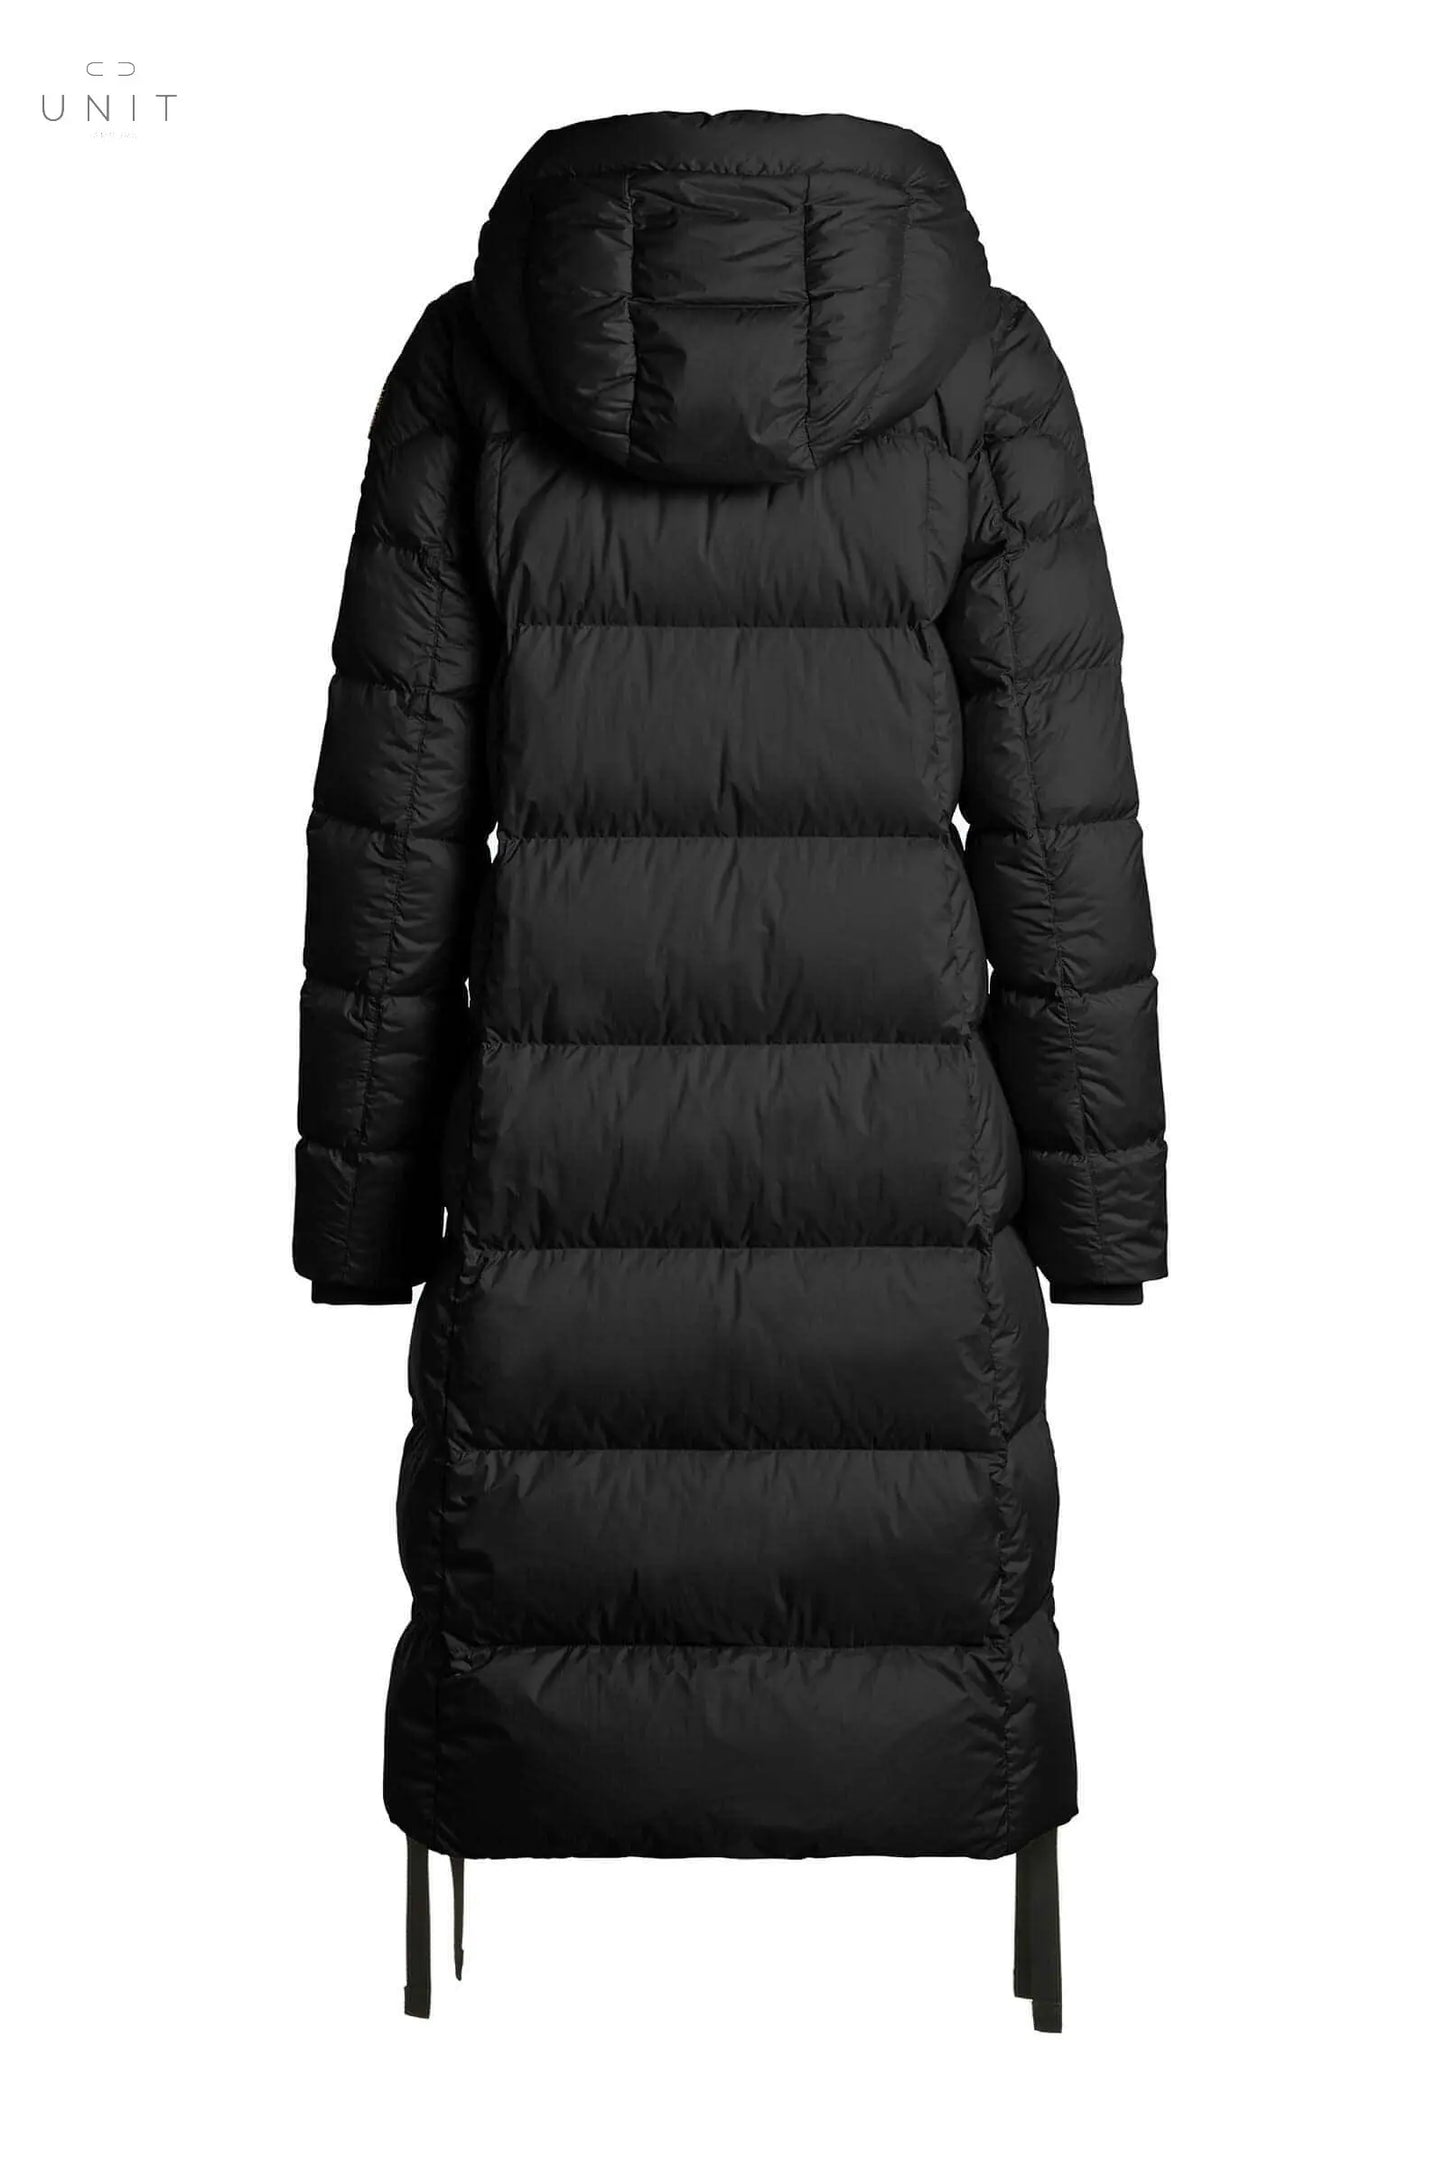 Parajumpers PANDA - WOMAN, HOODED DOWN COAT, black, online only